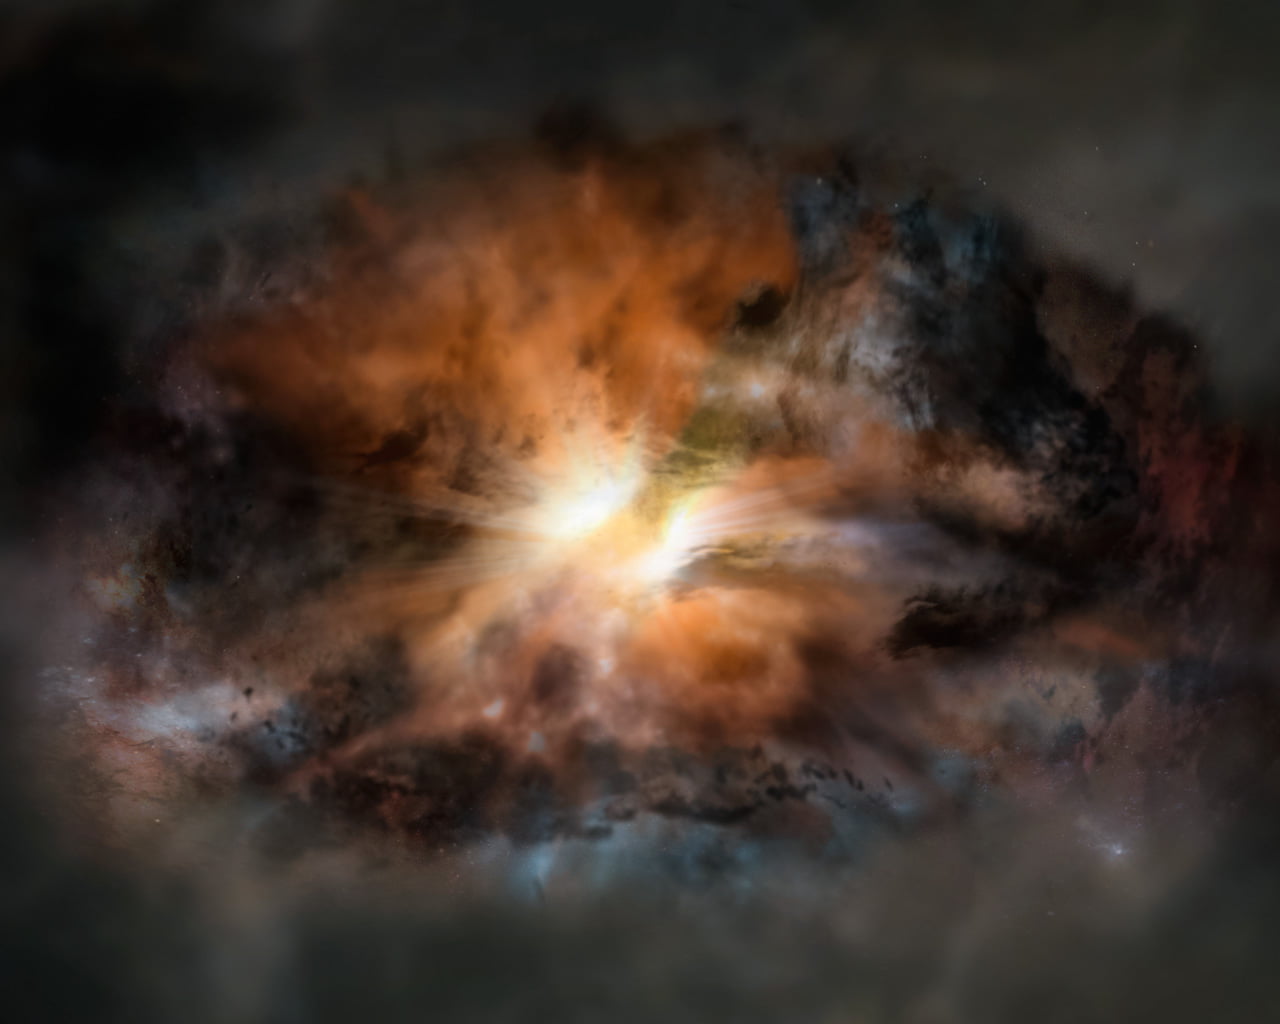 Artist impression of W2246-0526, a single galaxy glowing in infrared light as intensely as 350 trillion suns. It is so violently turbulent that it may eventually jettison its entire supply of star-forming gas, according to new observations with ALMA.